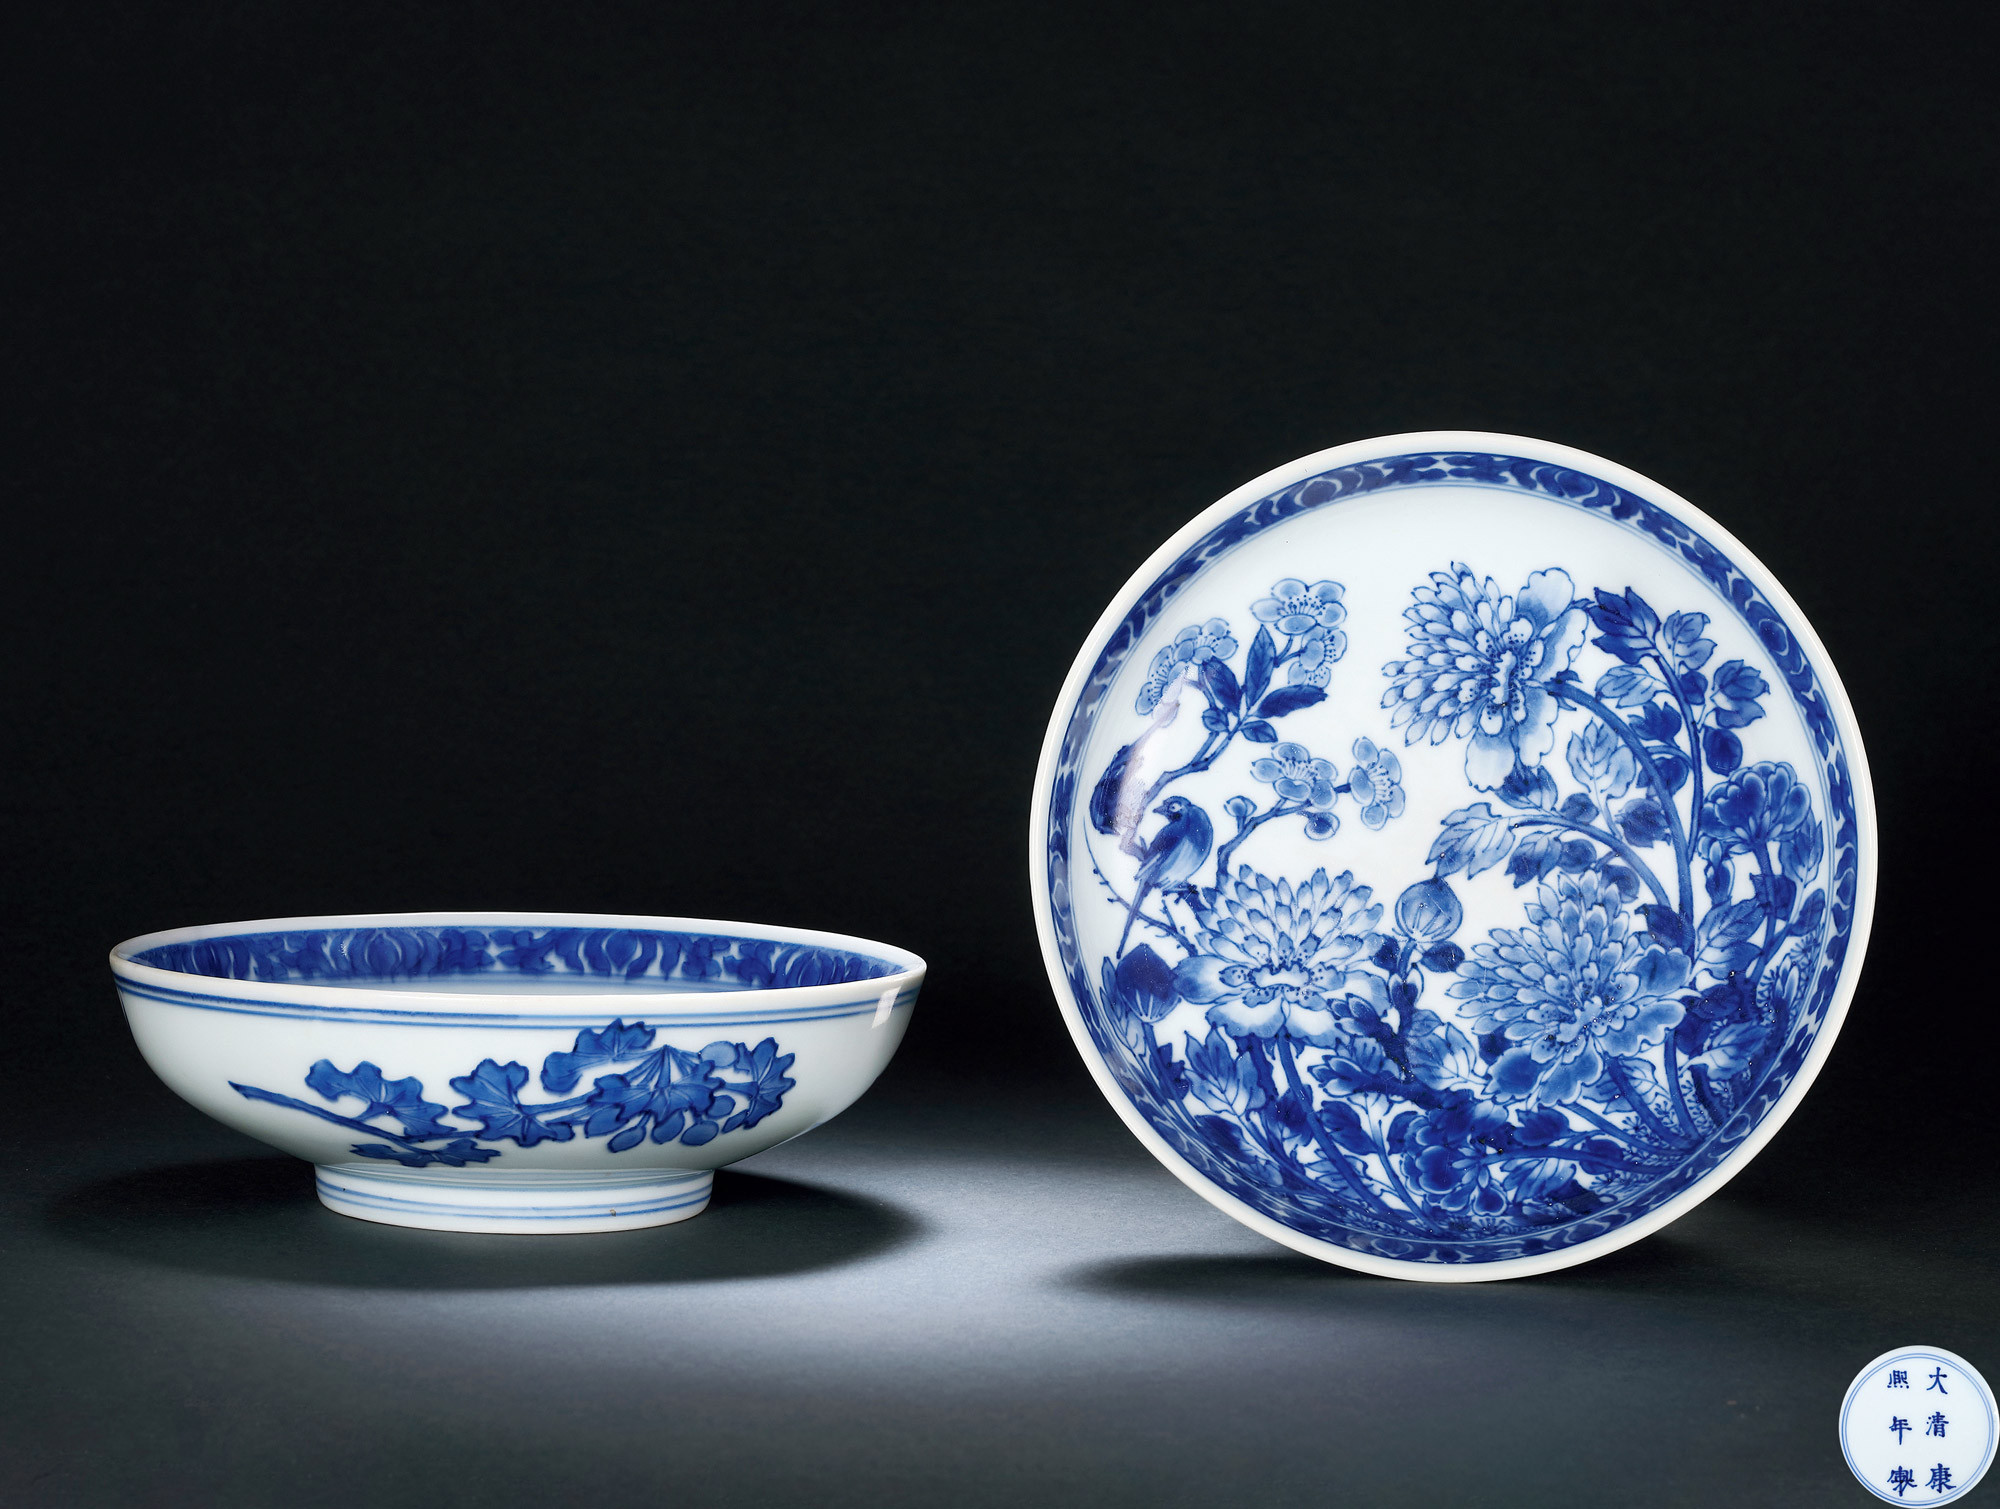 A PAIR OF BLUE AND WHITE PLATE WITH FLOWER AND BIRDS DESIGN